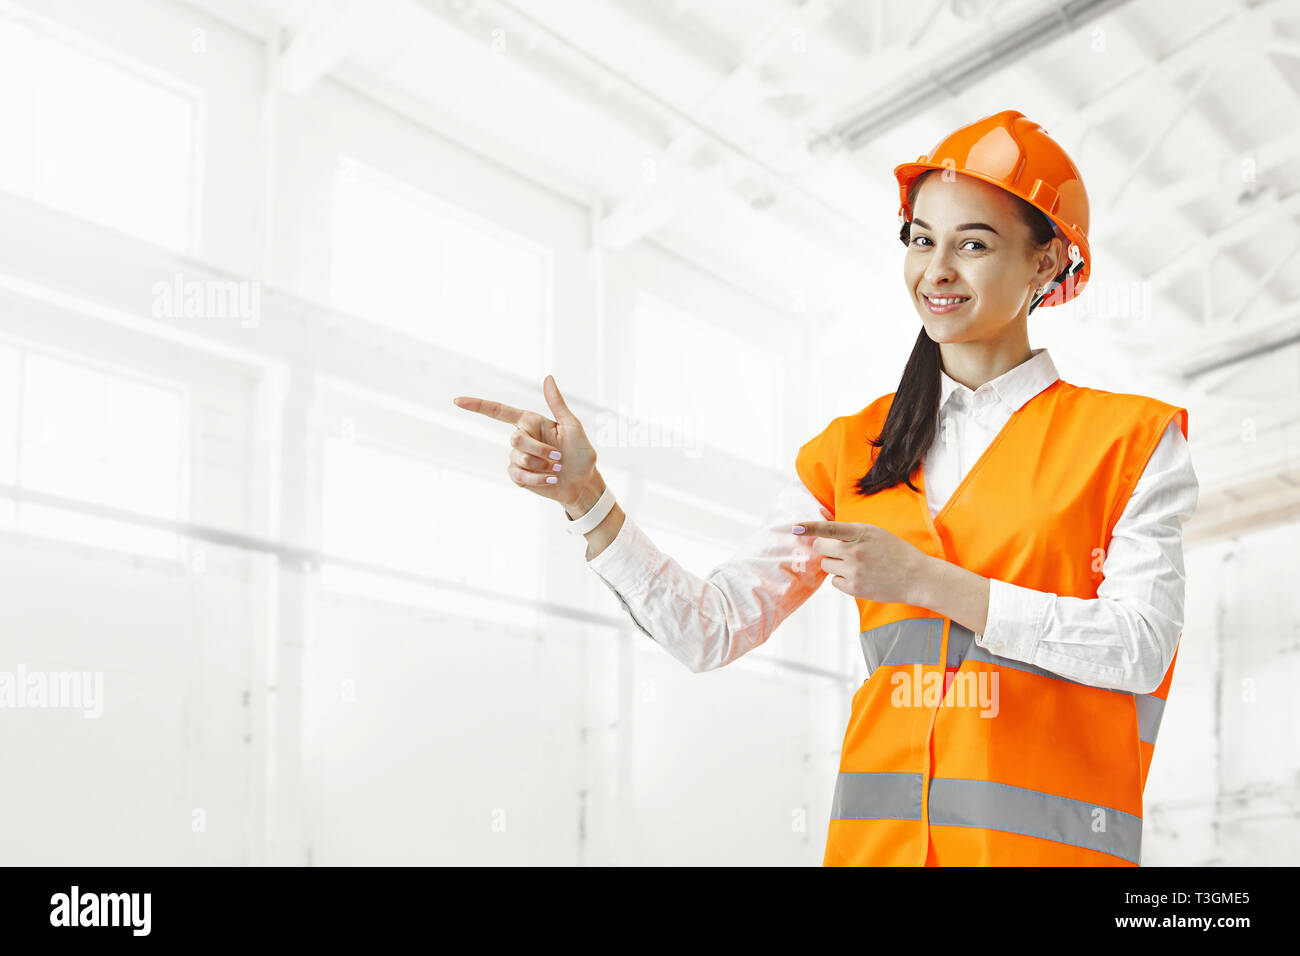 Destroying gender stereotypes. Female builder in male profession. Woman standing against industrial background and pointing to left. Safety specialist, engineer, occupation, businesswoman, job concept. Stock Photo